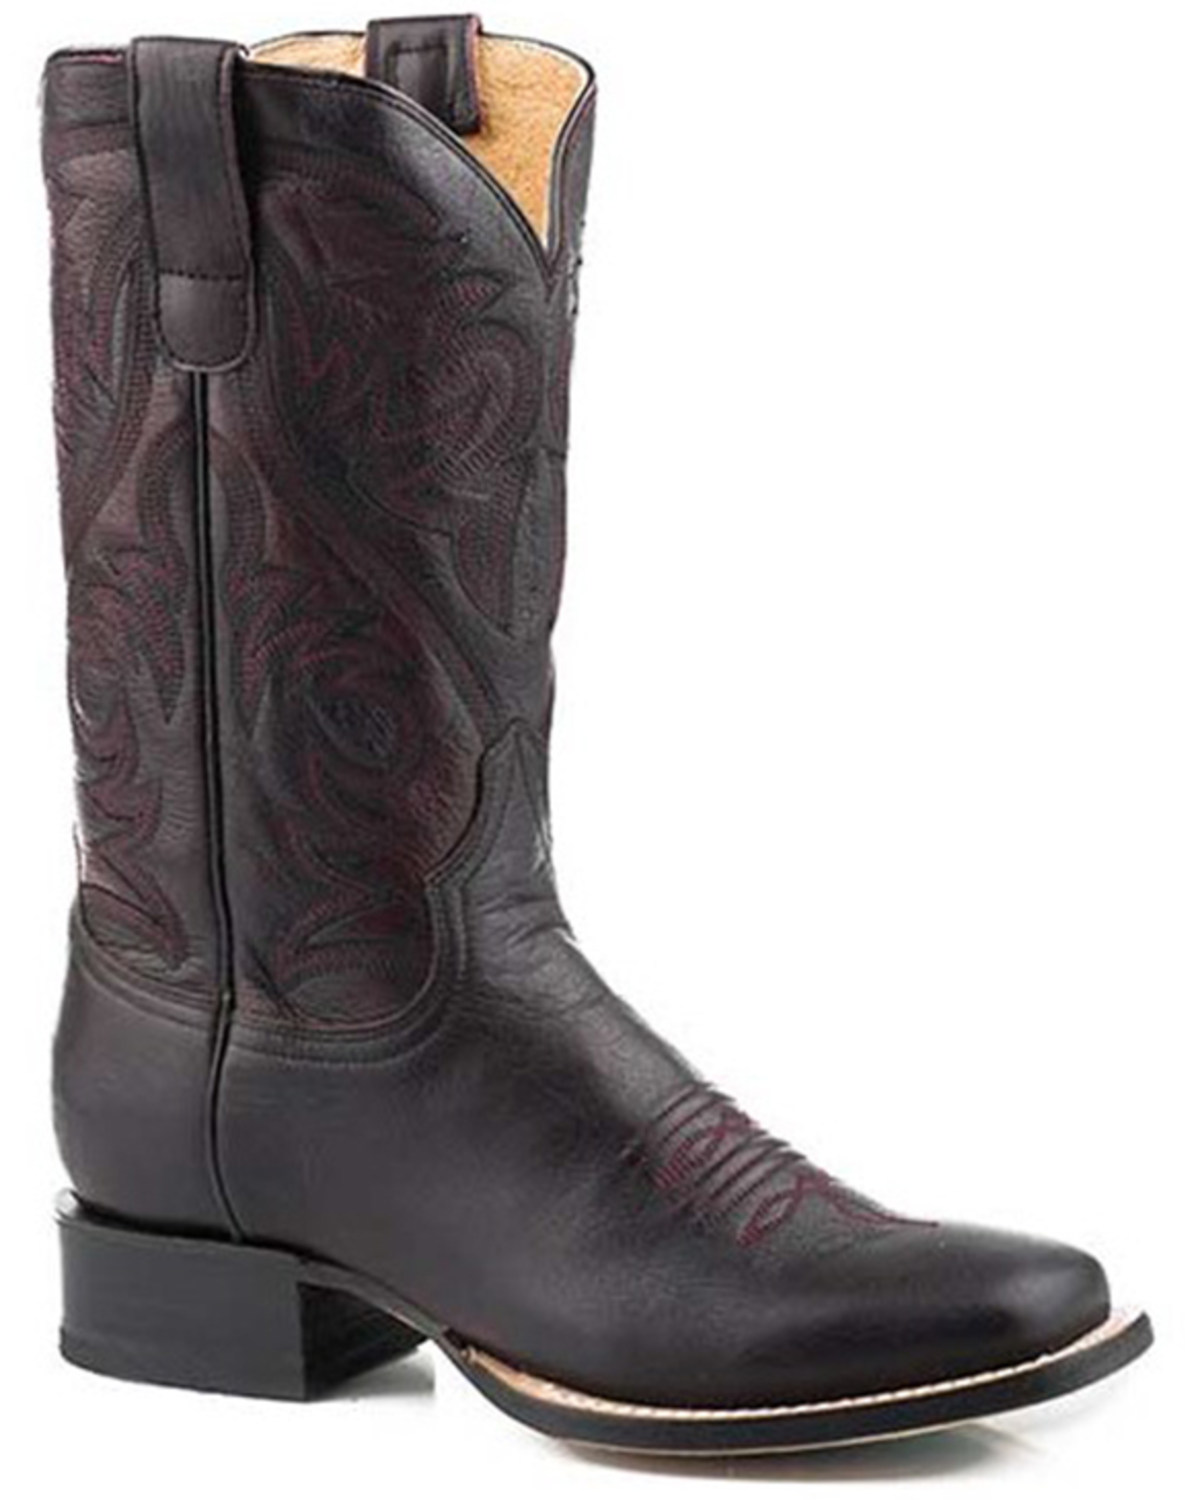 Roper Women's Brook Western Boots - Broad Square Toe